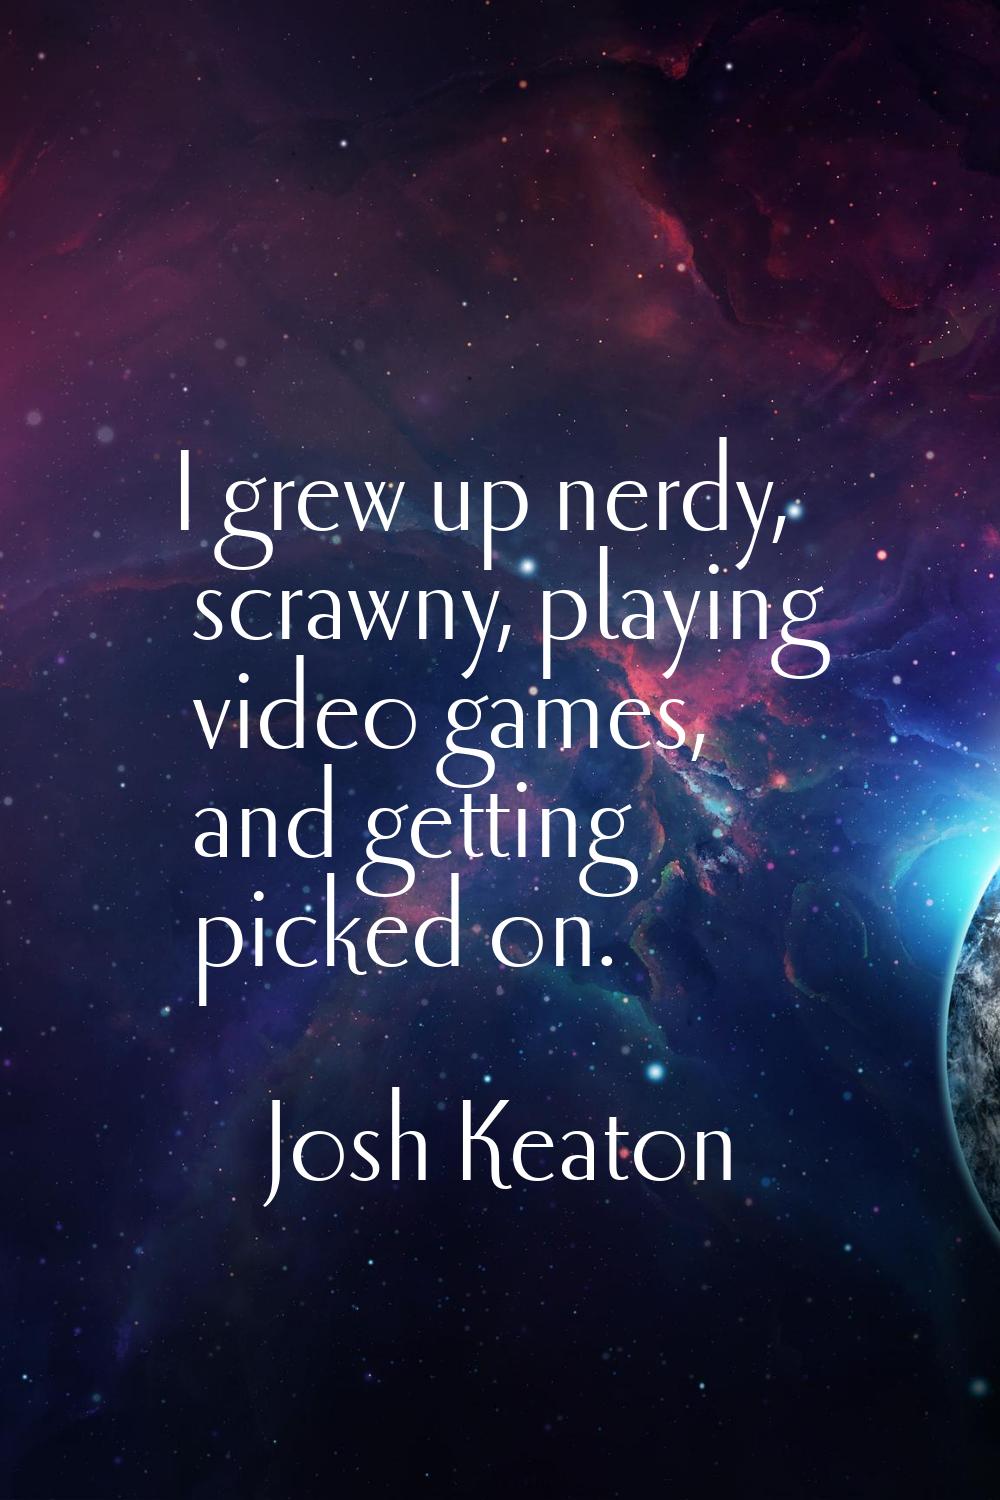 I grew up nerdy, scrawny, playing video games, and getting picked on.